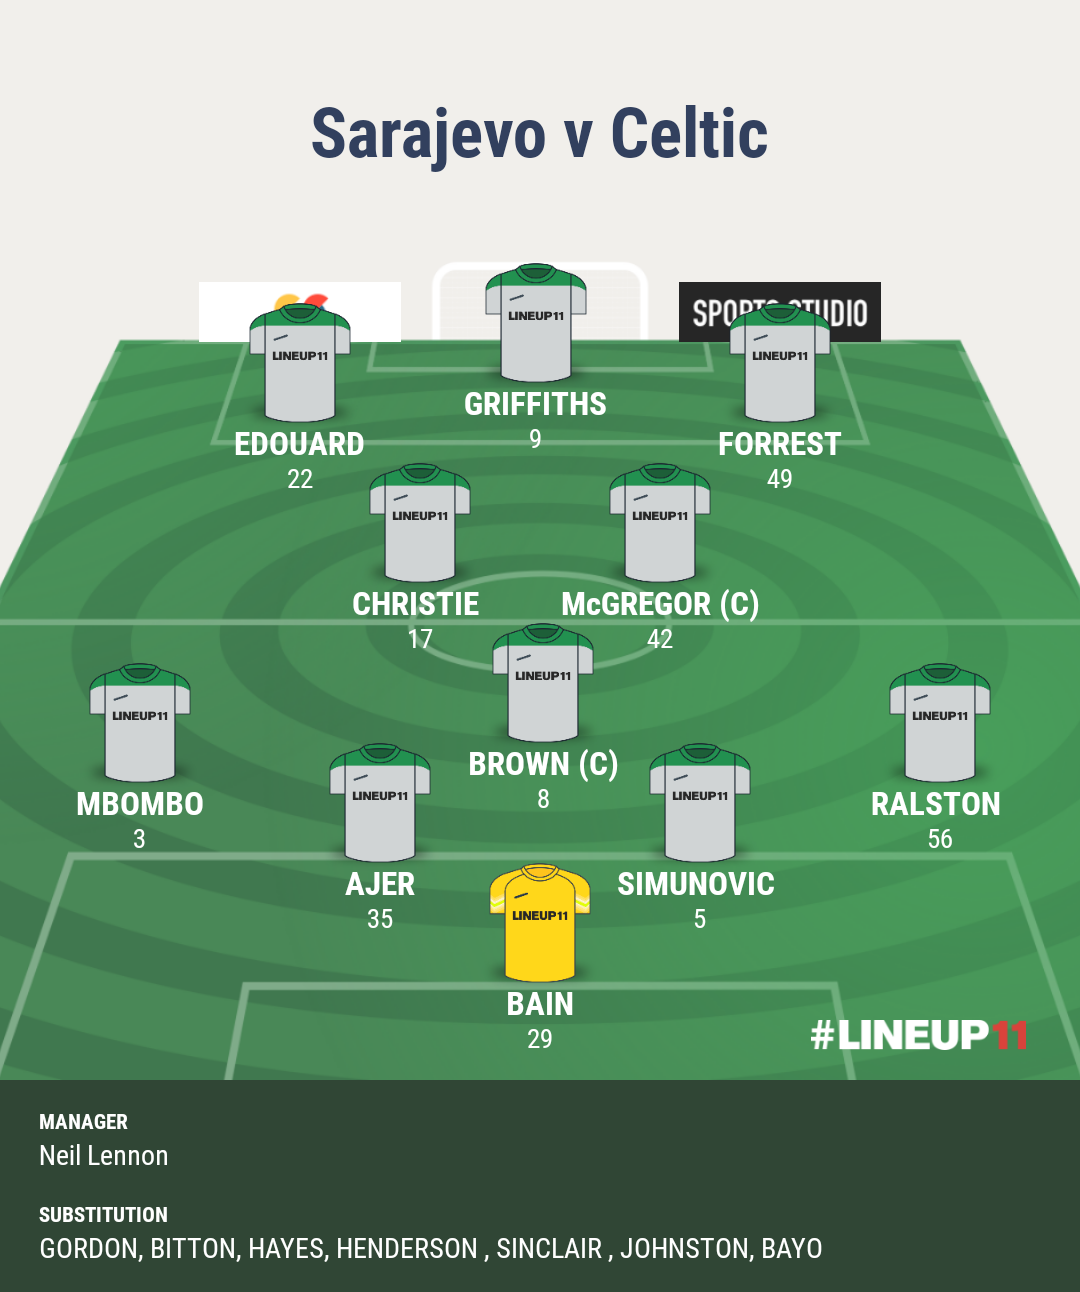 Based on pre season performances/form etc coupled with the fact Ntcham, Rogic and Jullien may be unavailable I'd go with this 11, even away from home. Mbombo must go straight in as Hayes is dreadful.